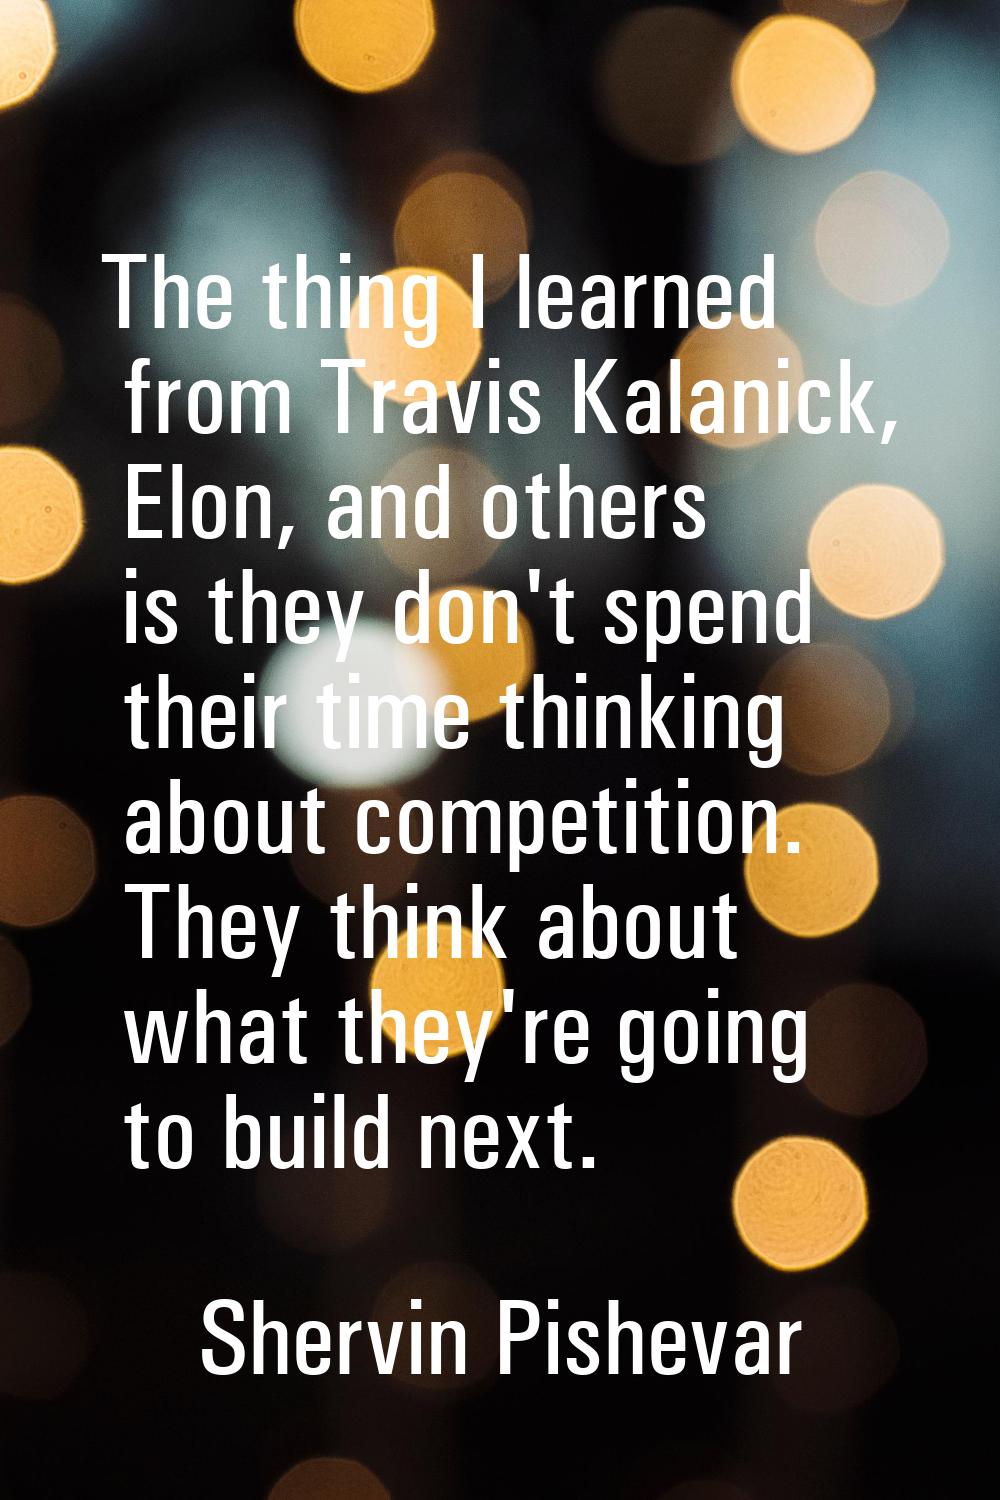 The thing I learned from Travis Kalanick, Elon, and others is they don't spend their time thinking 